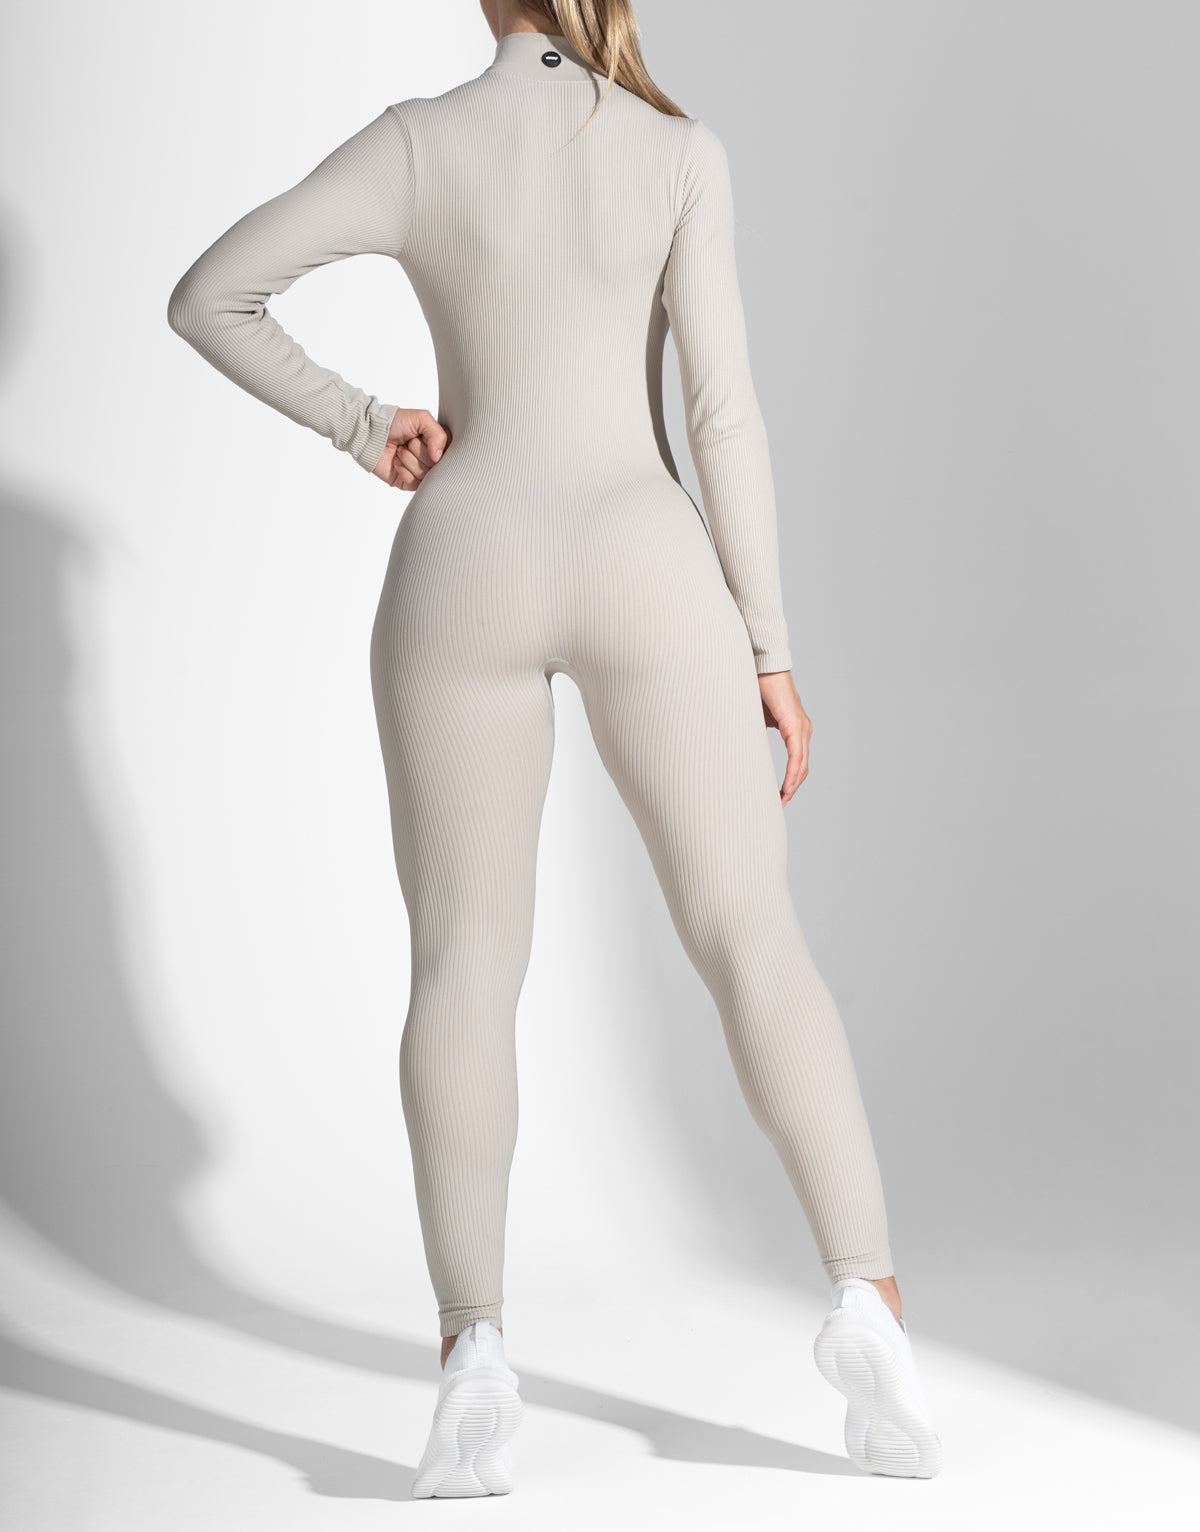 GREY CATSUIT SEAMLESS